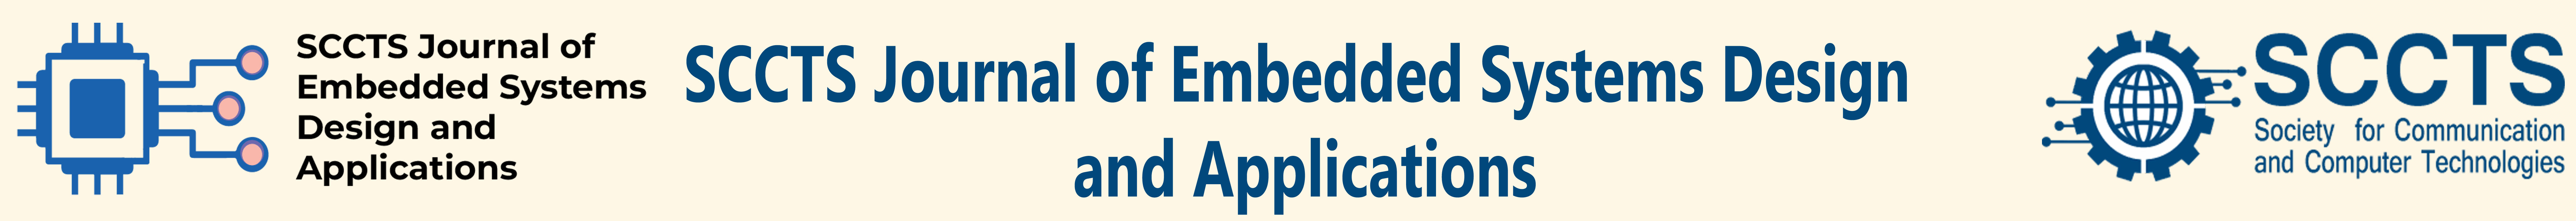 SCCTS Journal of Embedded Systems Design and Applications